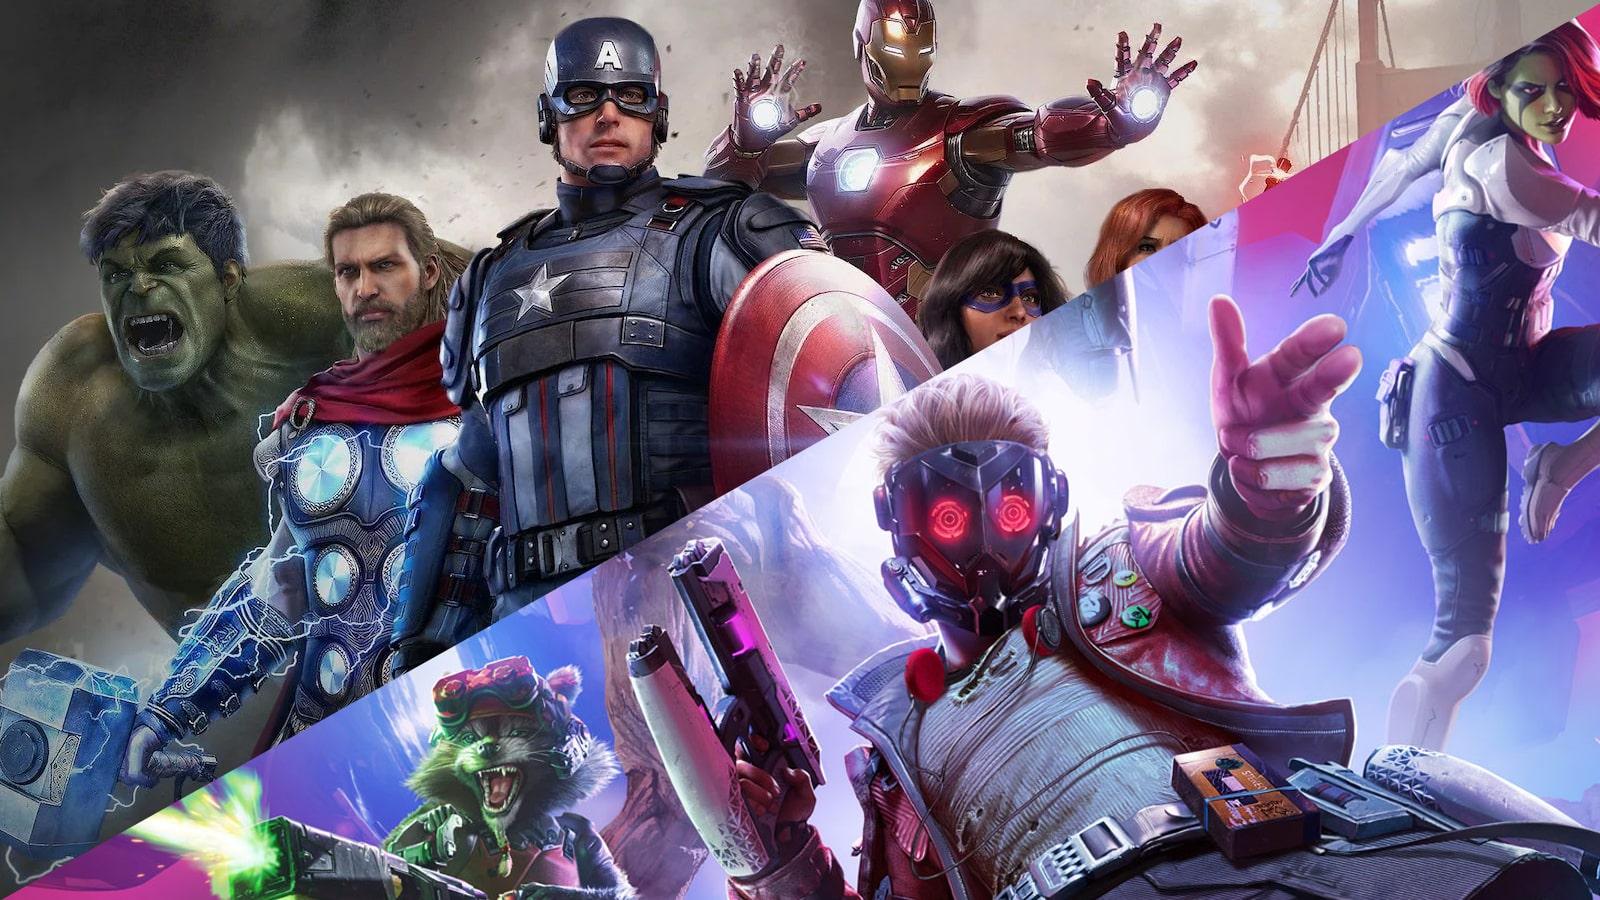 Embrace Group has acquired Marvel's Avengers and Guardians of the Galaxy